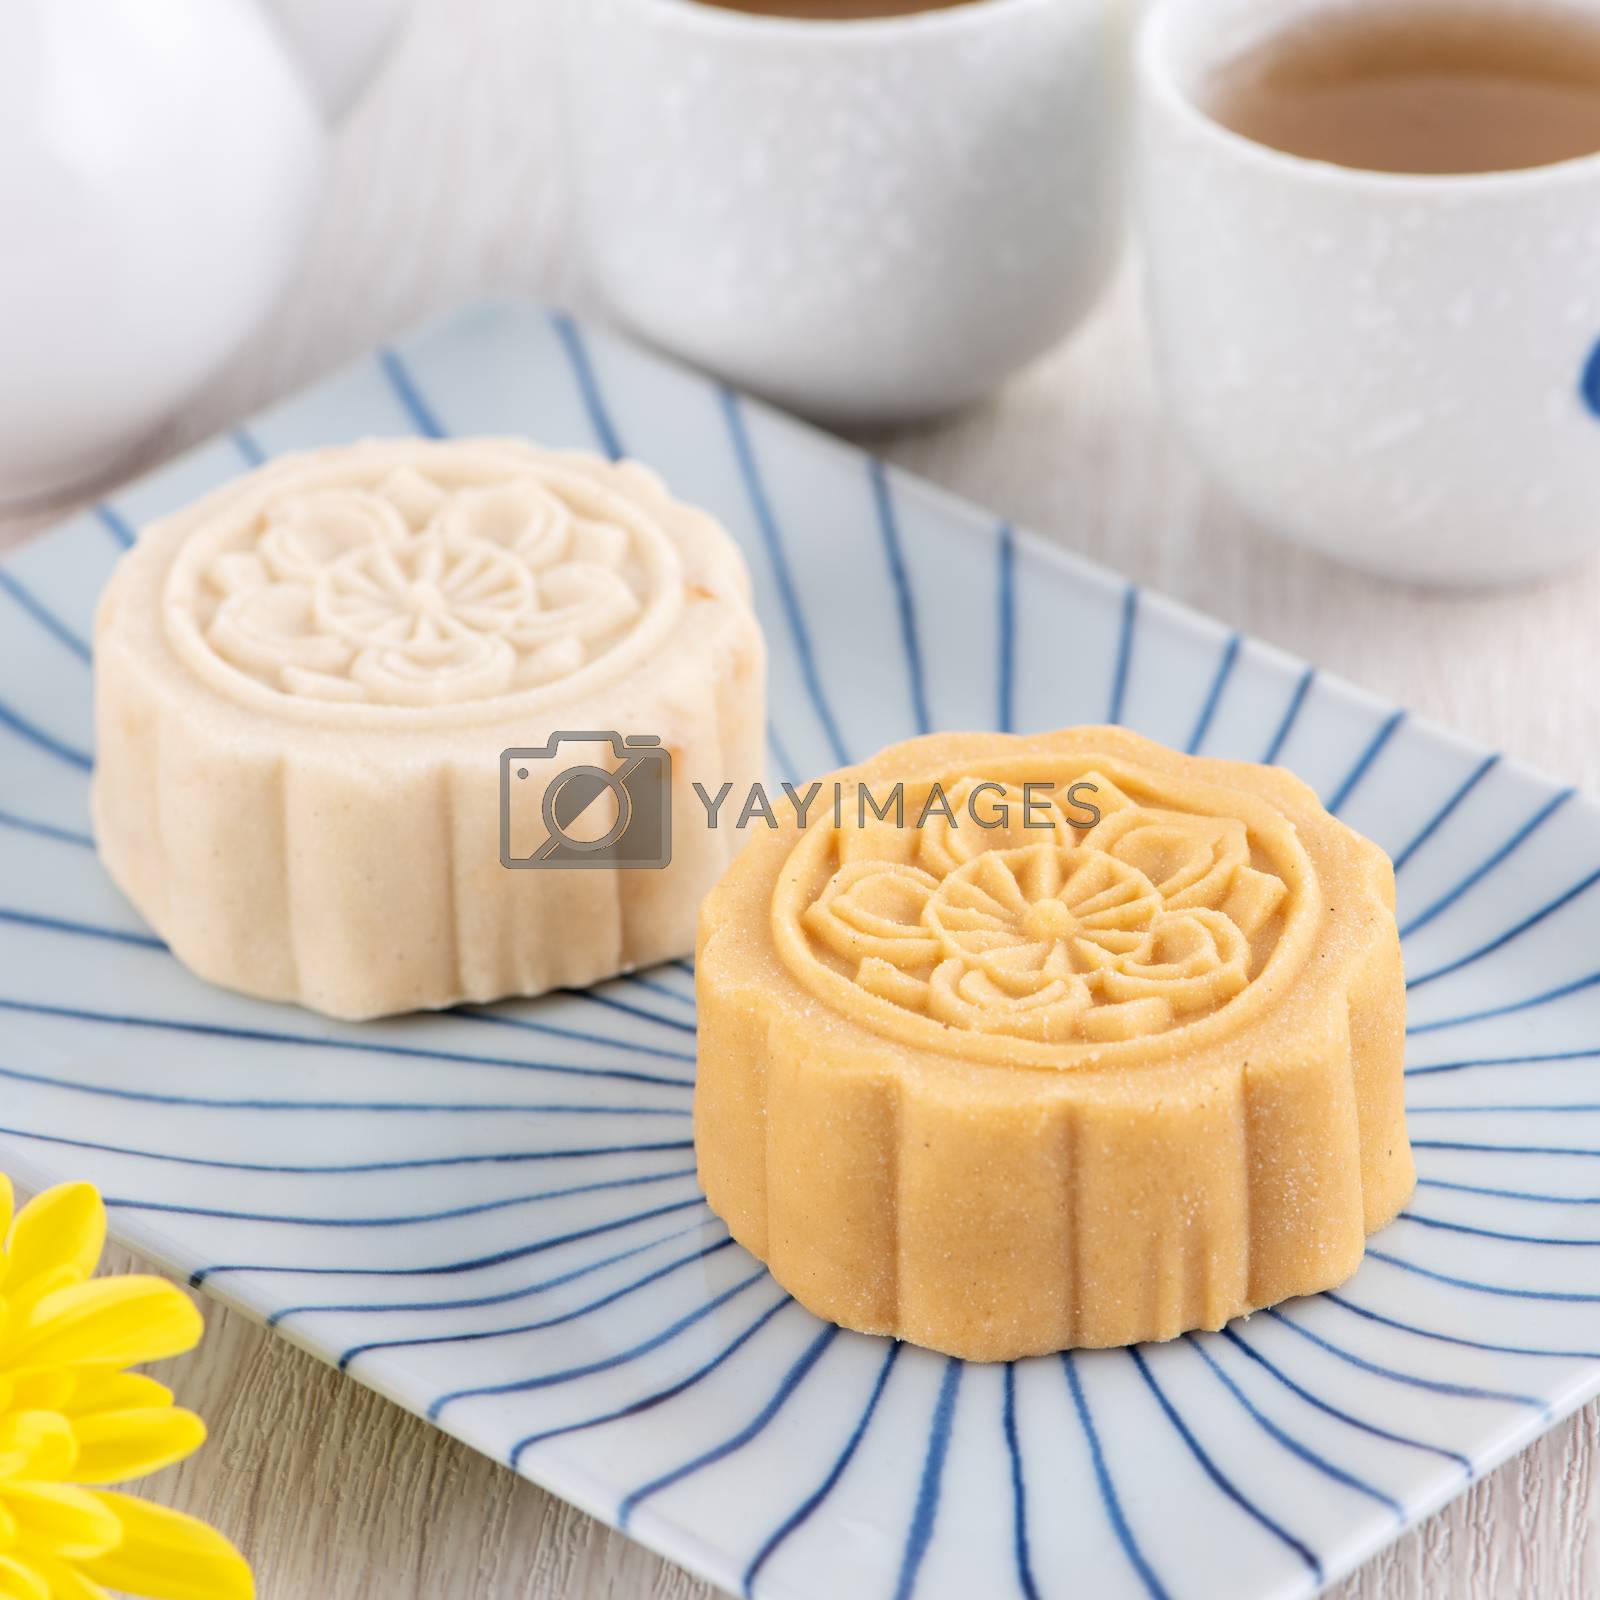 Royalty free image of Colorful beautiful moon cake, mung bean cake, Champion Scholar P by ROMIXIMAGE